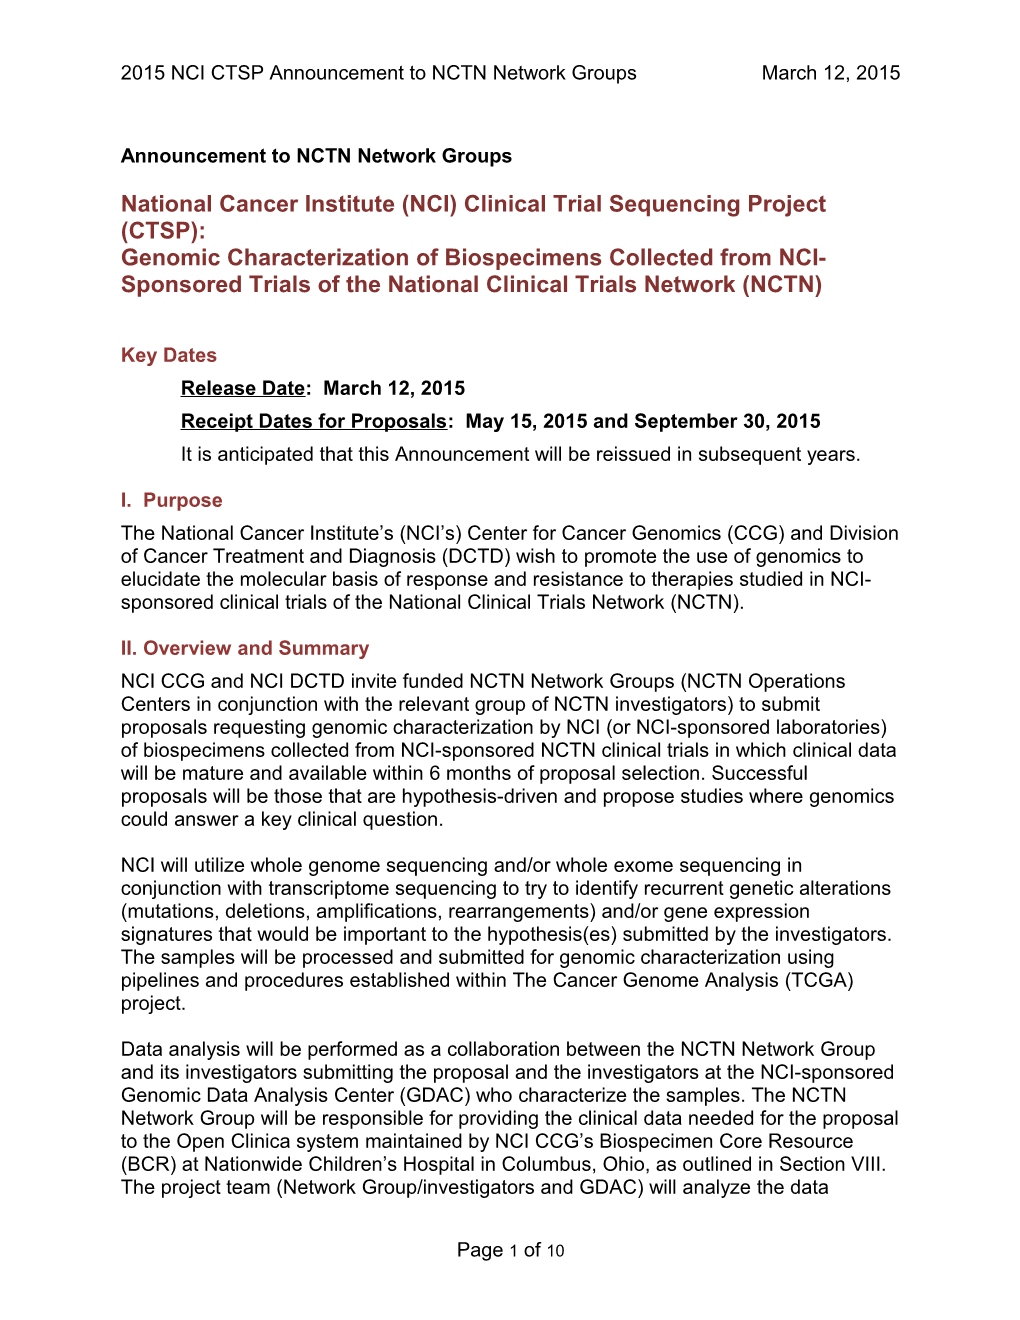 National Cancer Institute (NCI) Clinical Trial Sequencing Project (CTSP): Genomic